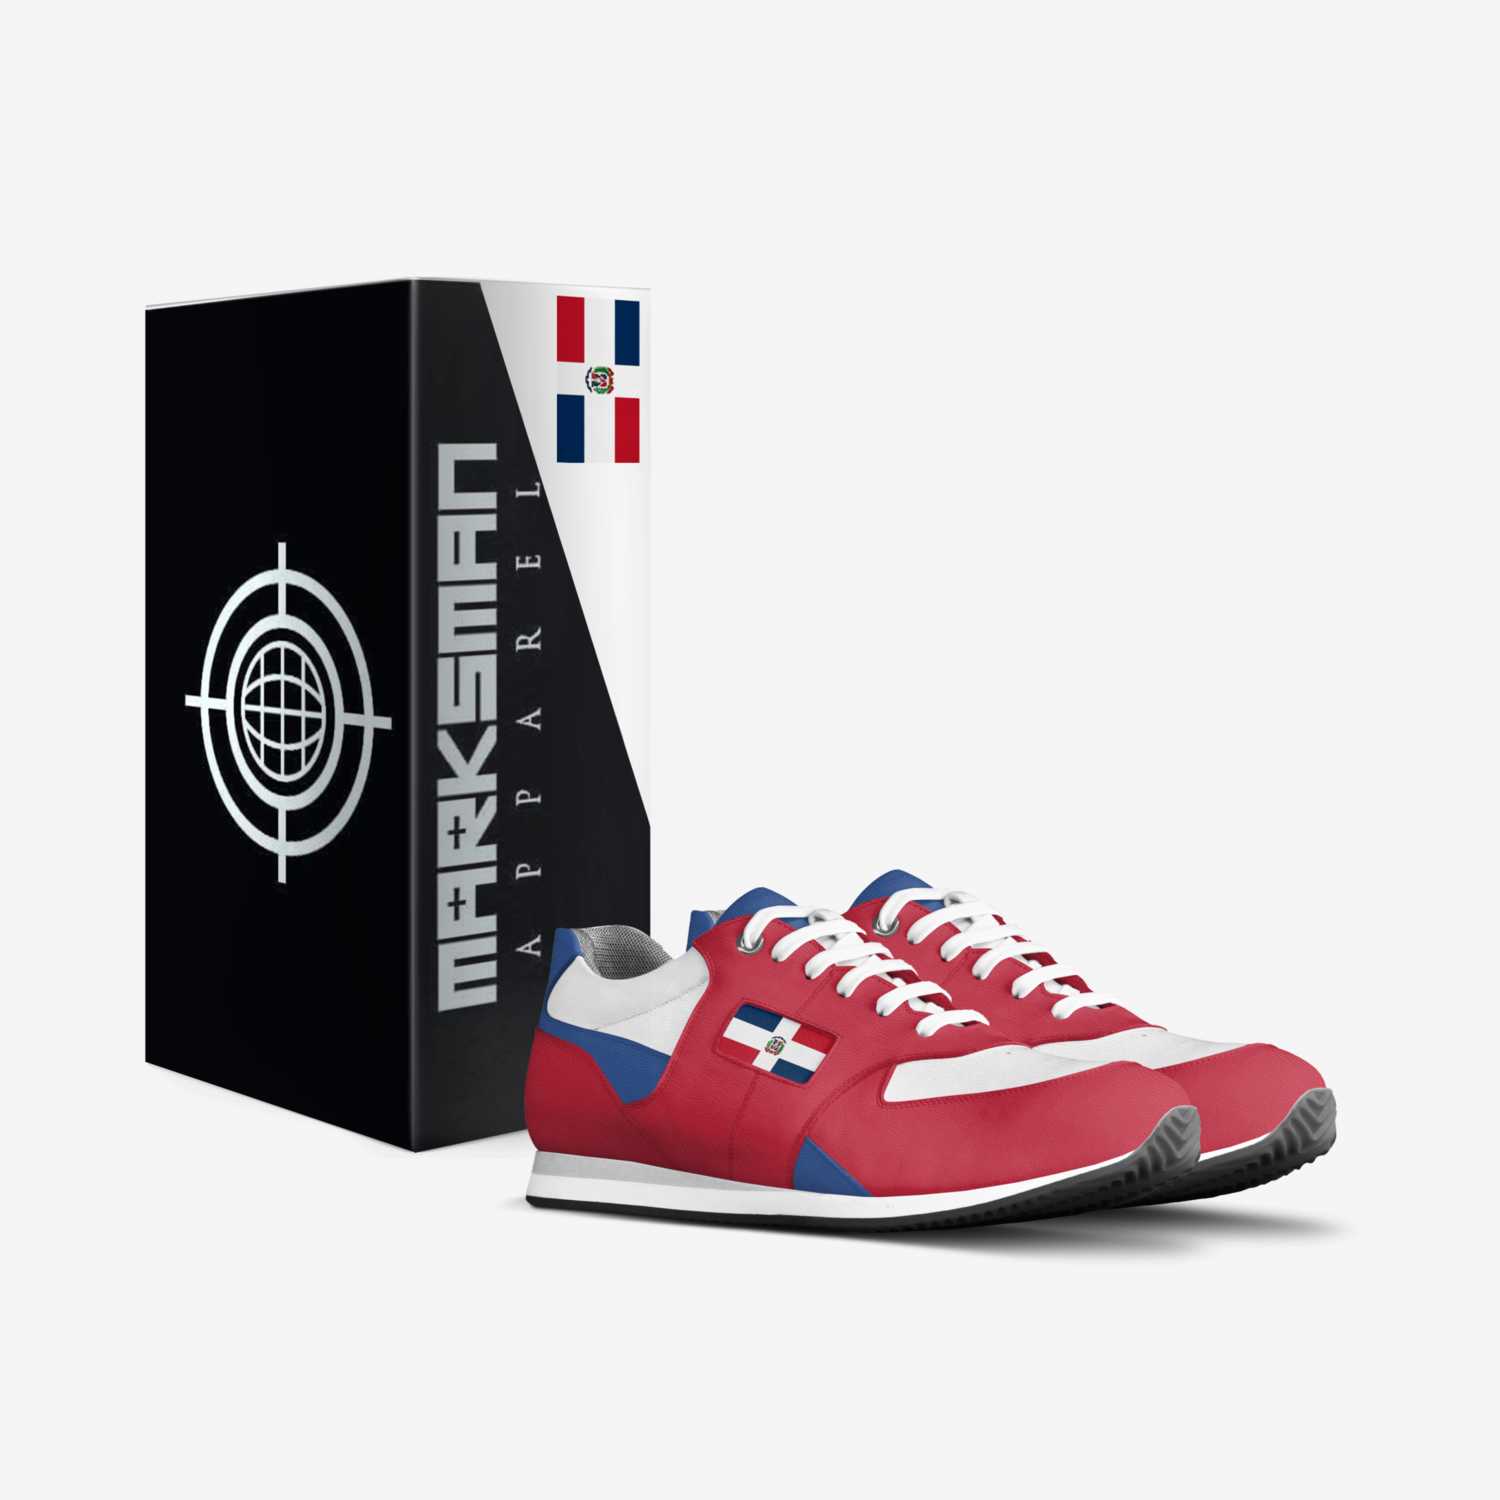 Platano custom made in Italy shoes by Marksman Apparel | Box view